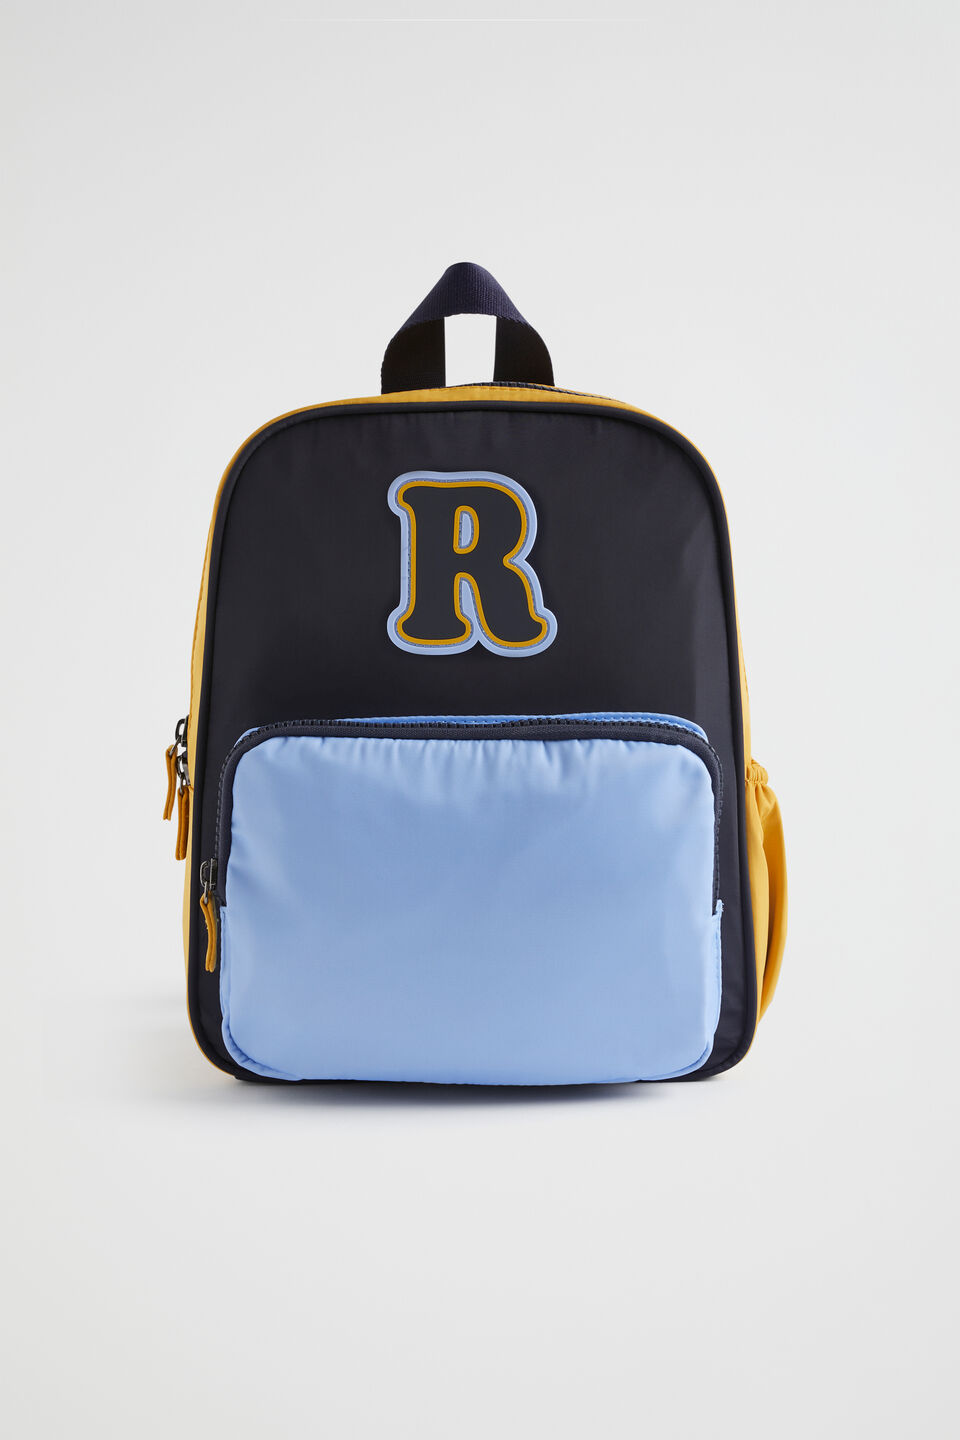 Colour Block Initial Backpack  R